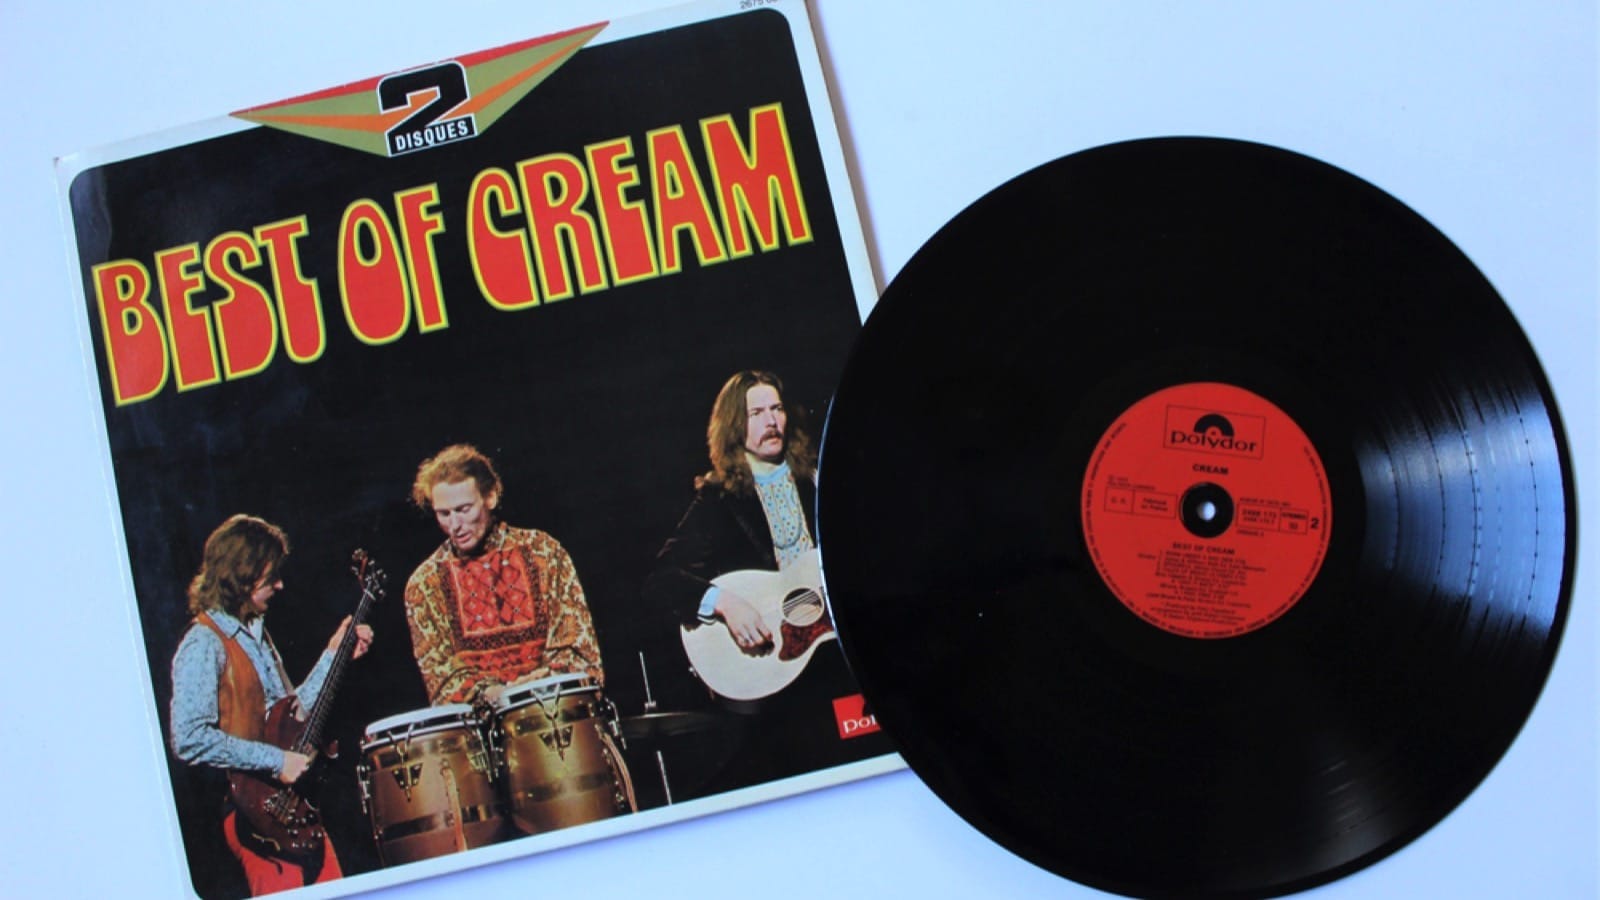 Miami, Fl, USA: Feb 26, 2021: Psychedelic, blues and hard rock band, Cream music album on vinyl record LP disc. Titled: Best of Cream album cover